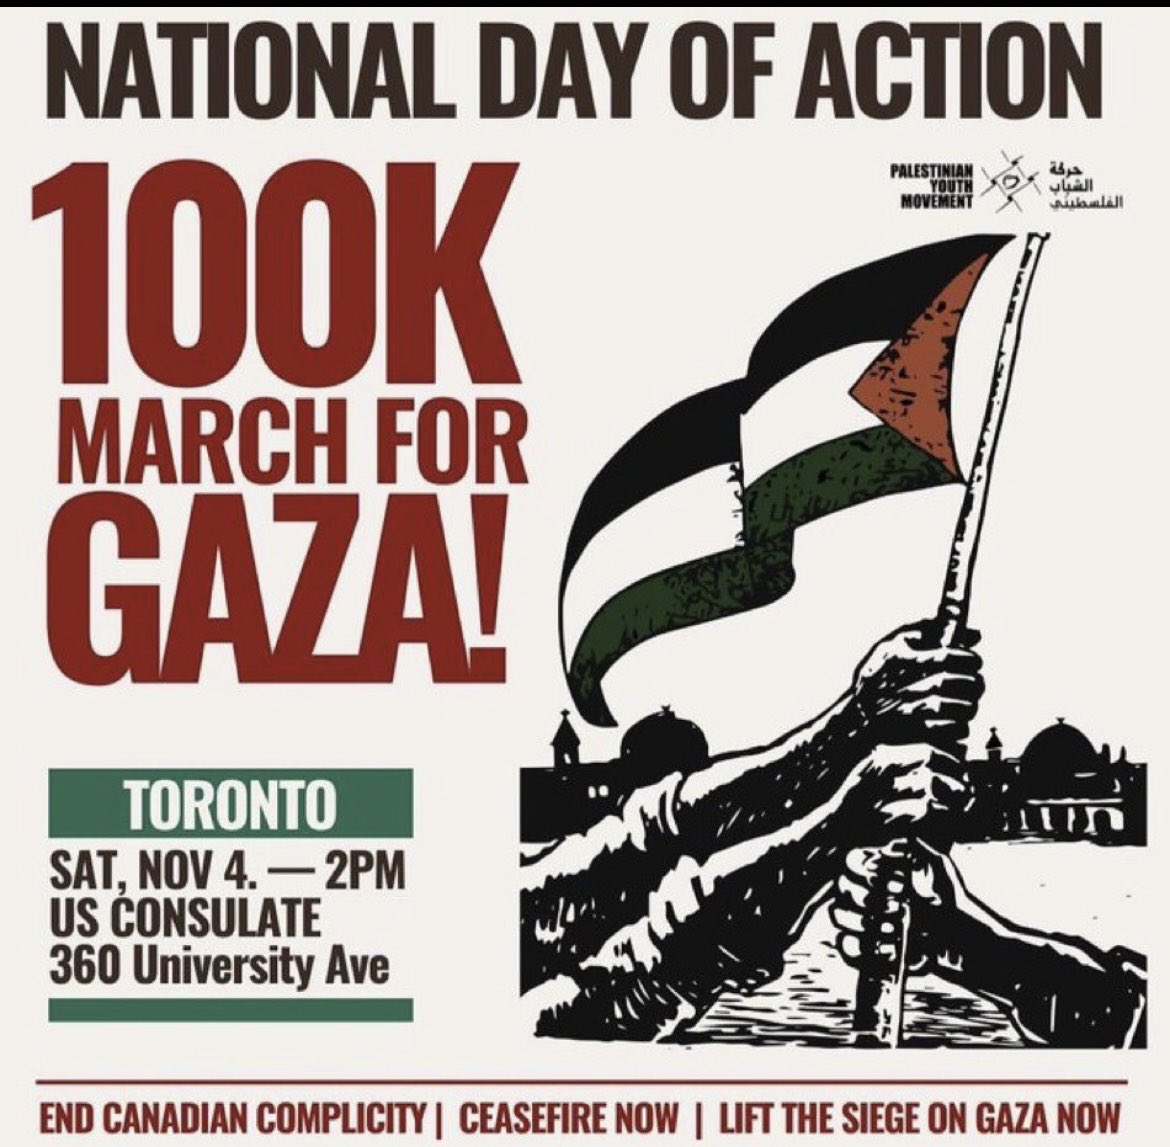 Toronto, I hope you’re getting your Bristol boards and making signs that say F*ck genocide. Get hydrated, pick out comfortable shoes and see you out there. Because one thing they ain’t gon do is use our tax dollars to murder children. #StandWithGaza